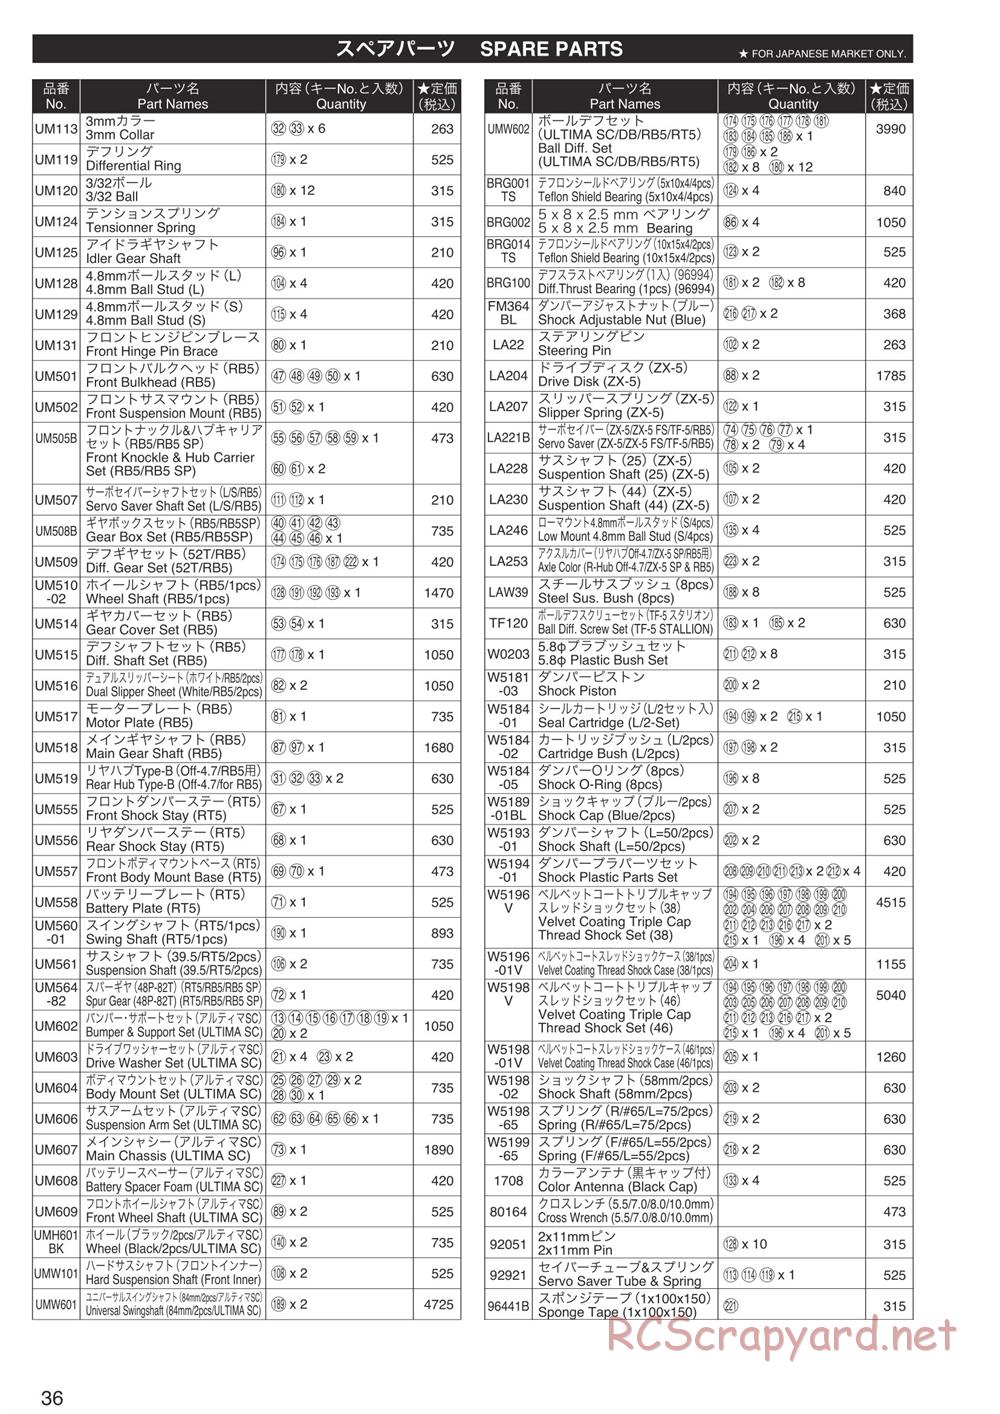 Kyosho - Ultima SCR - Parts List - Page 1